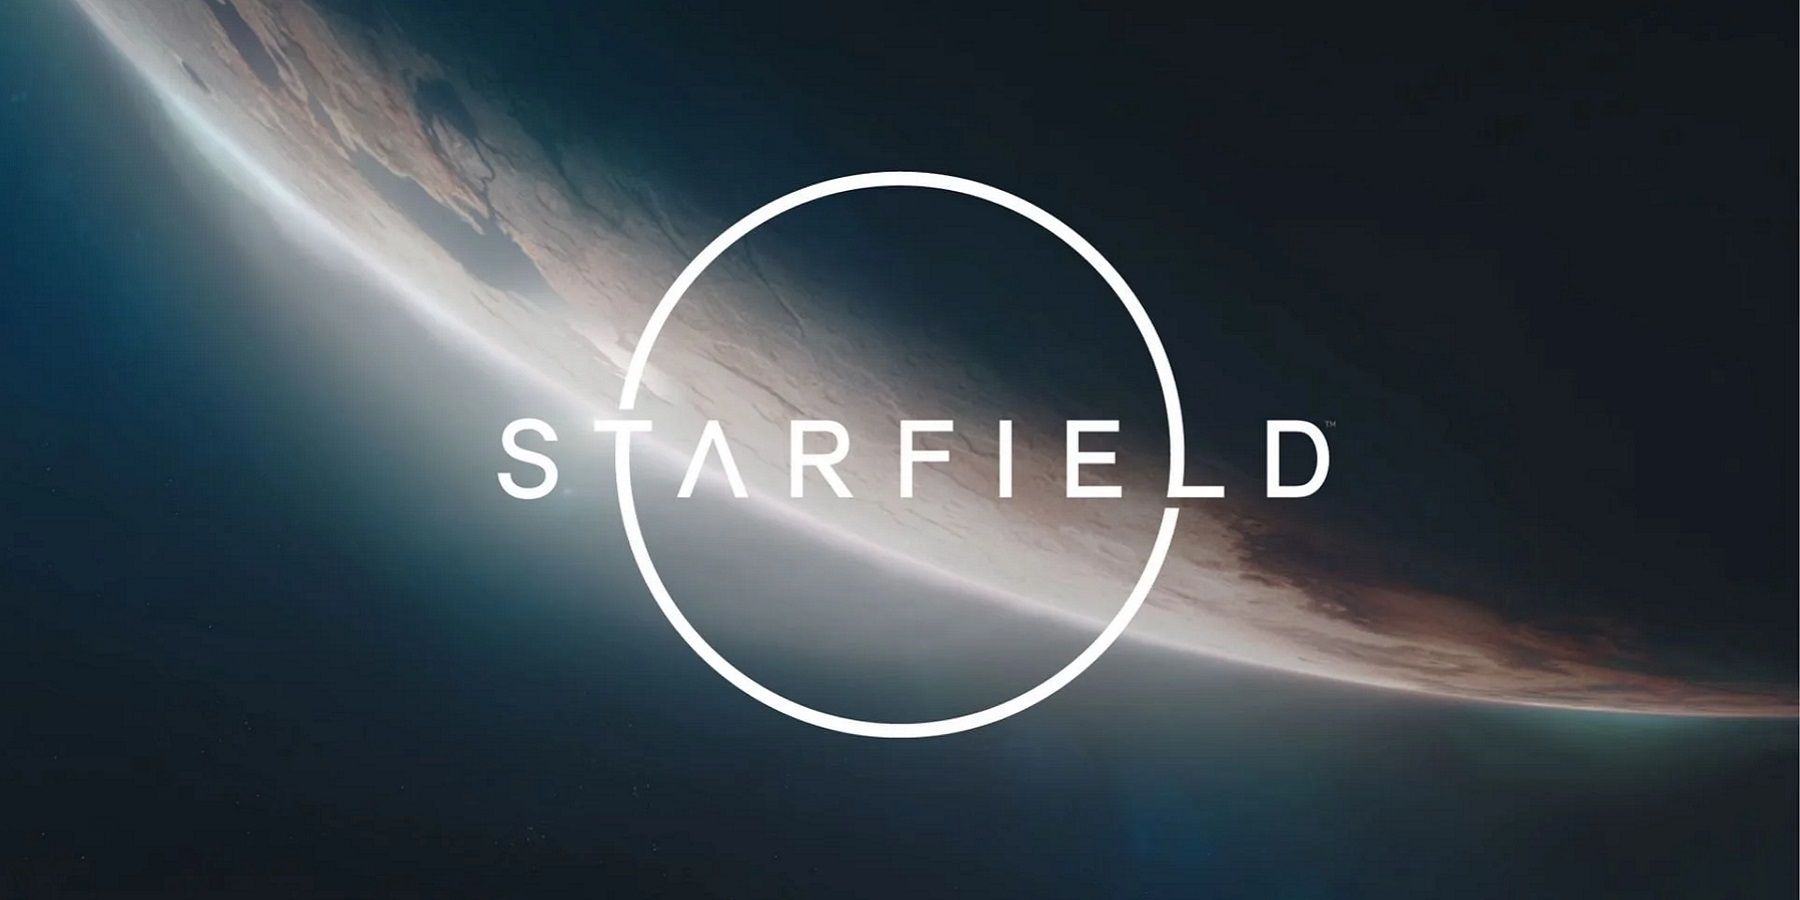 The Starfield logo with a looming planet behind it.